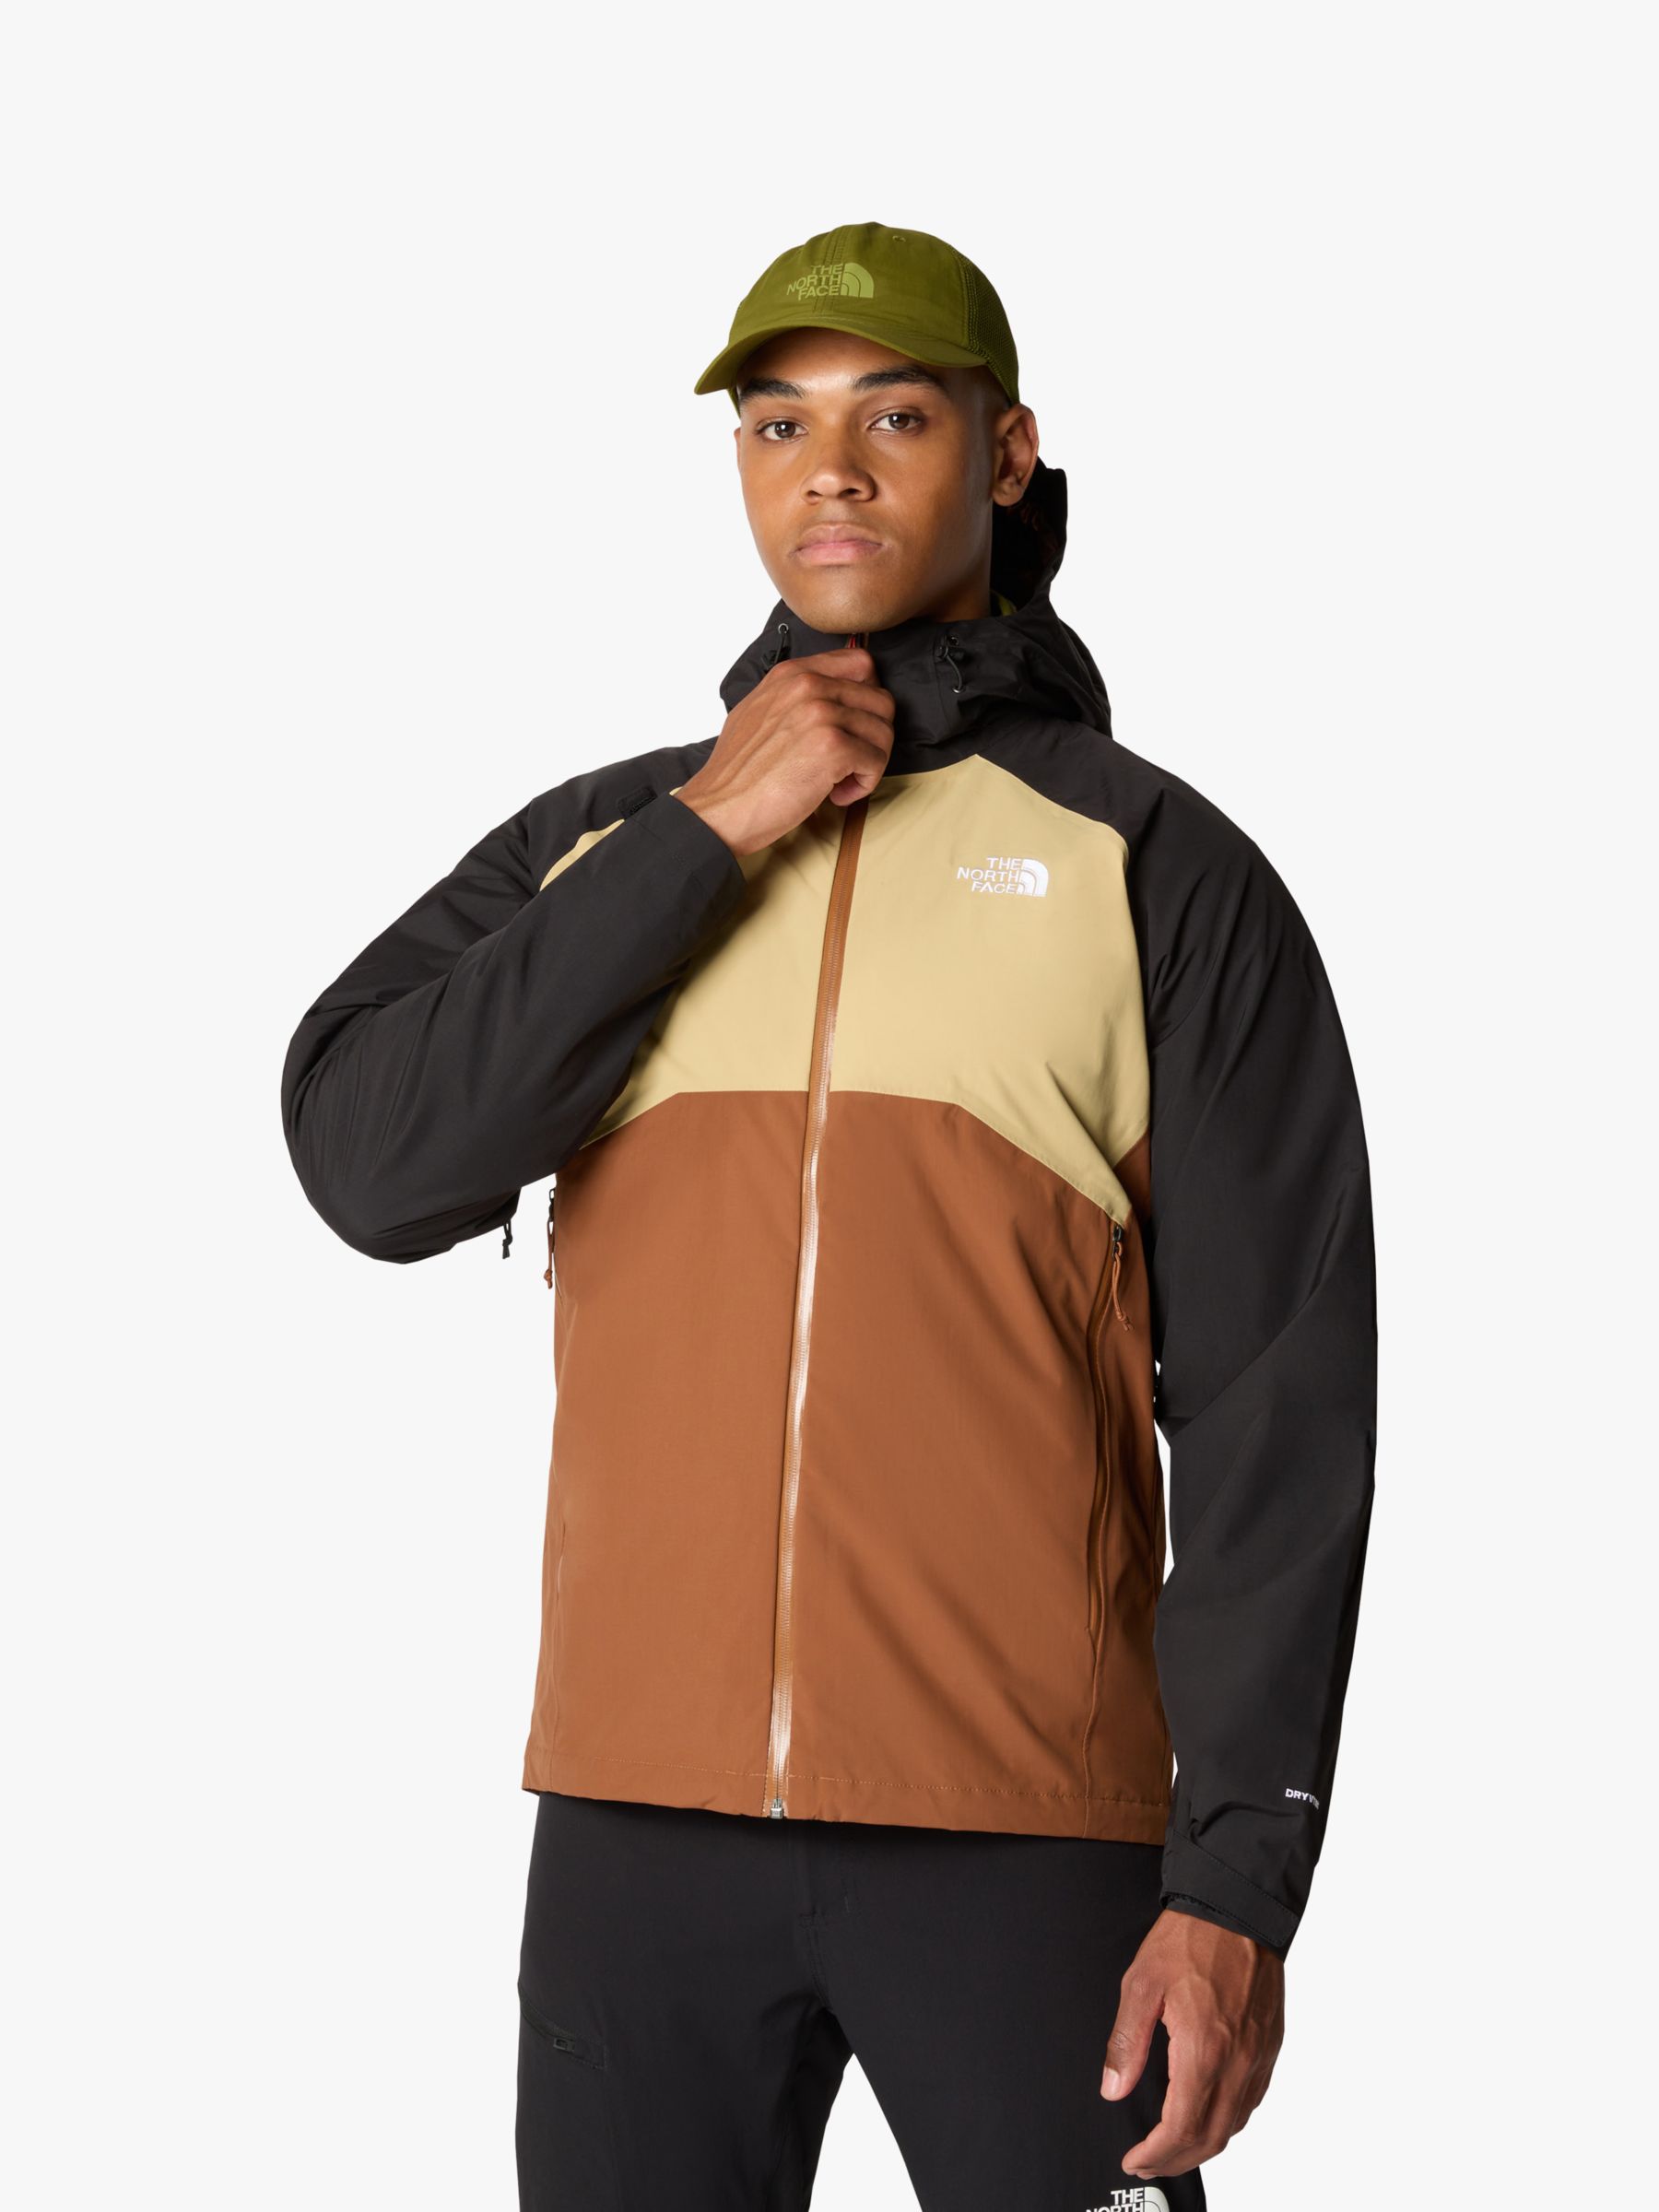 The North Face Men's Stratos Hooded Jacket,Brown/Khaki, XL